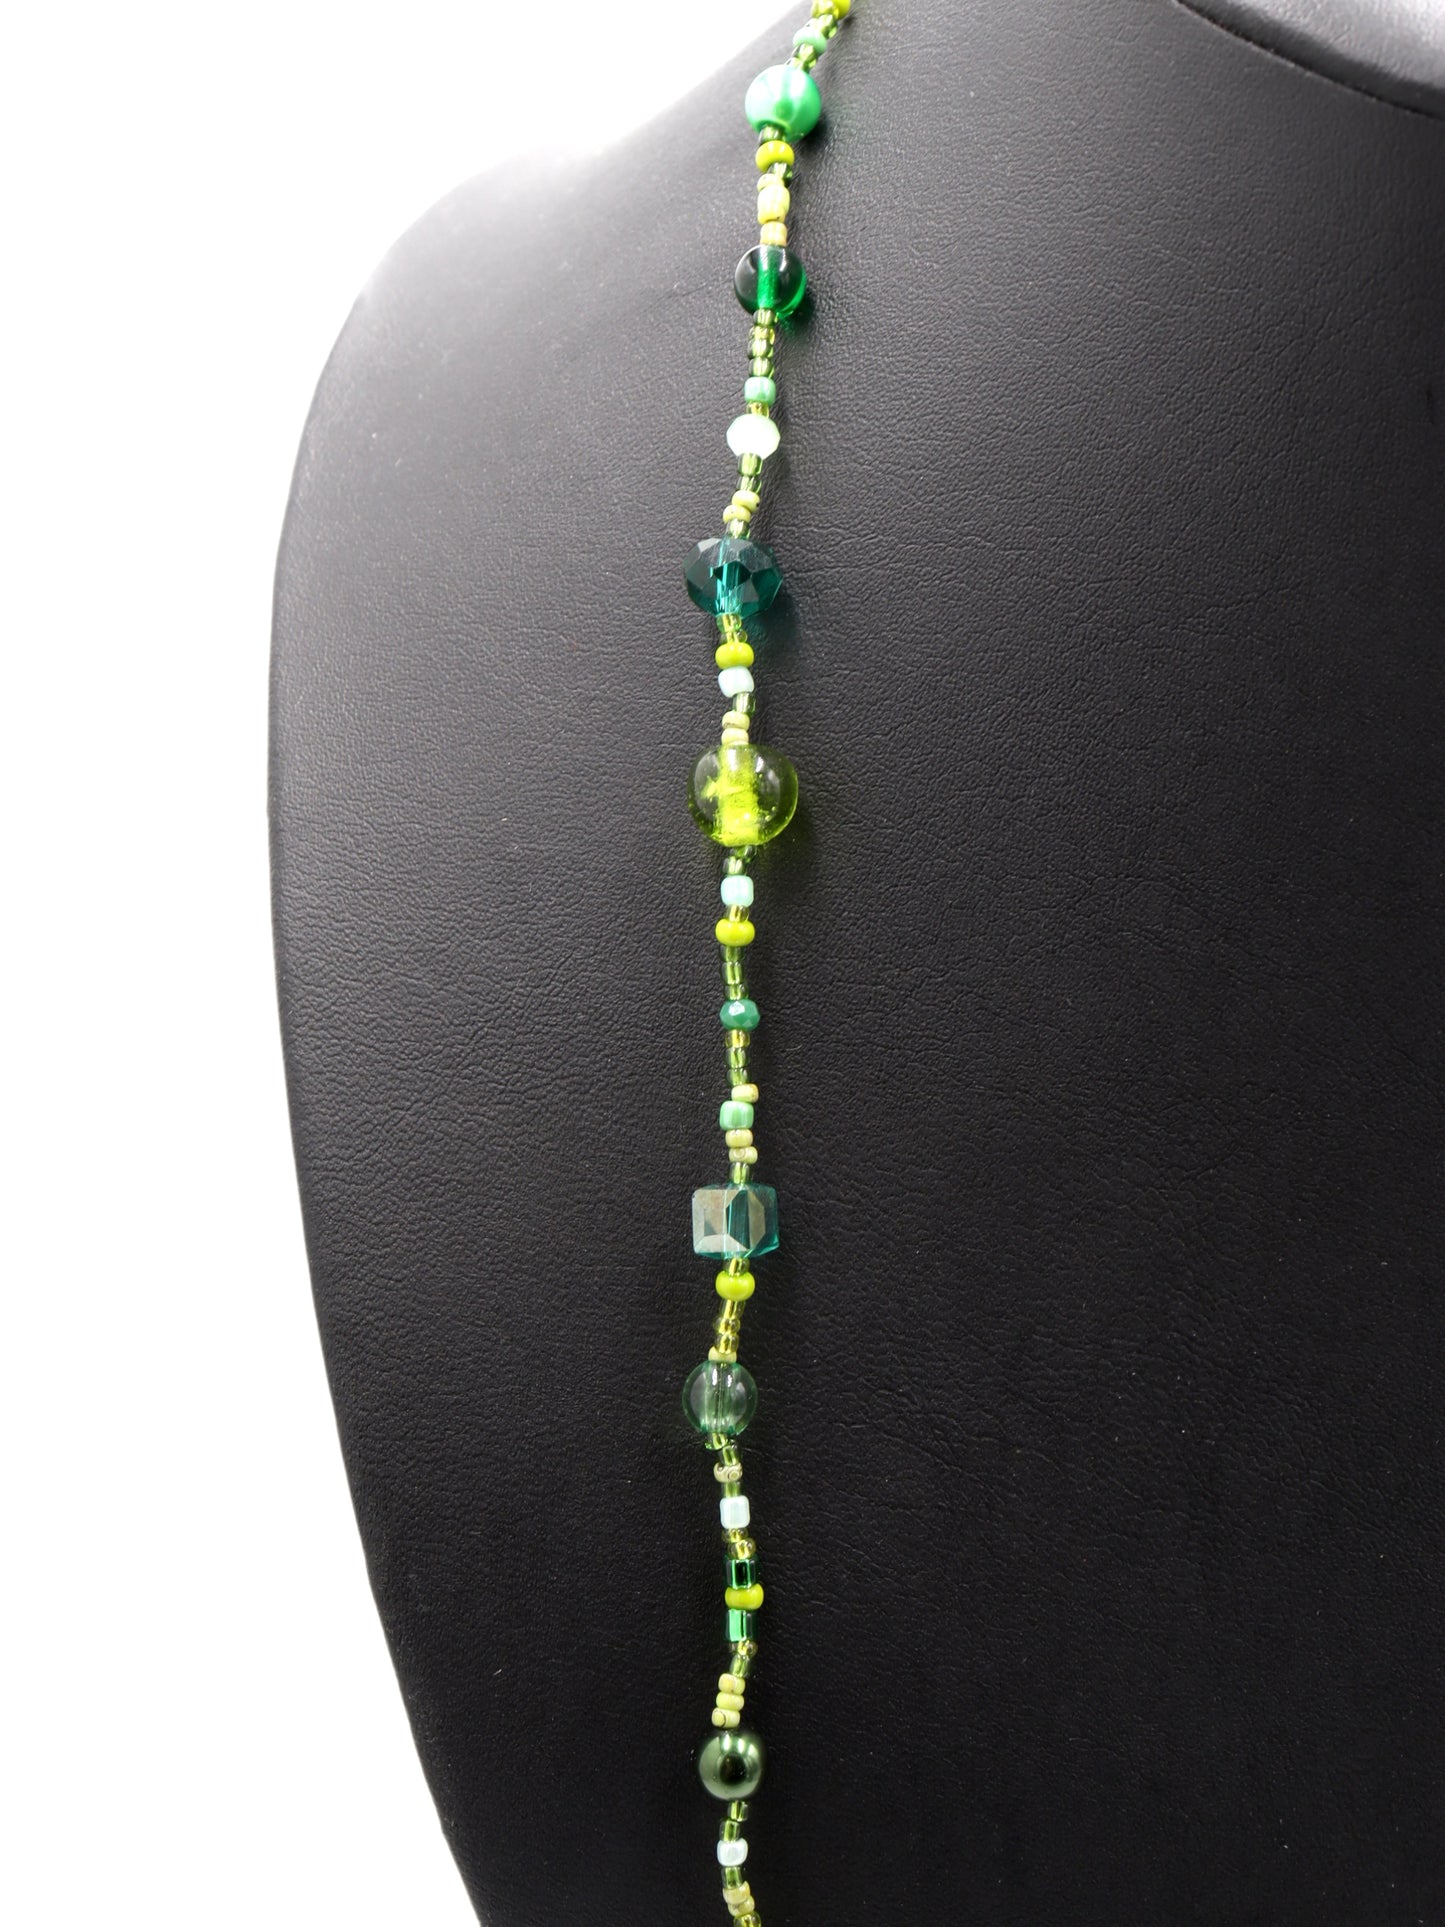 This Necklace will Make You Green with Envy – Green Queen 35” Long Party Necklace by Monkey’s Mojo